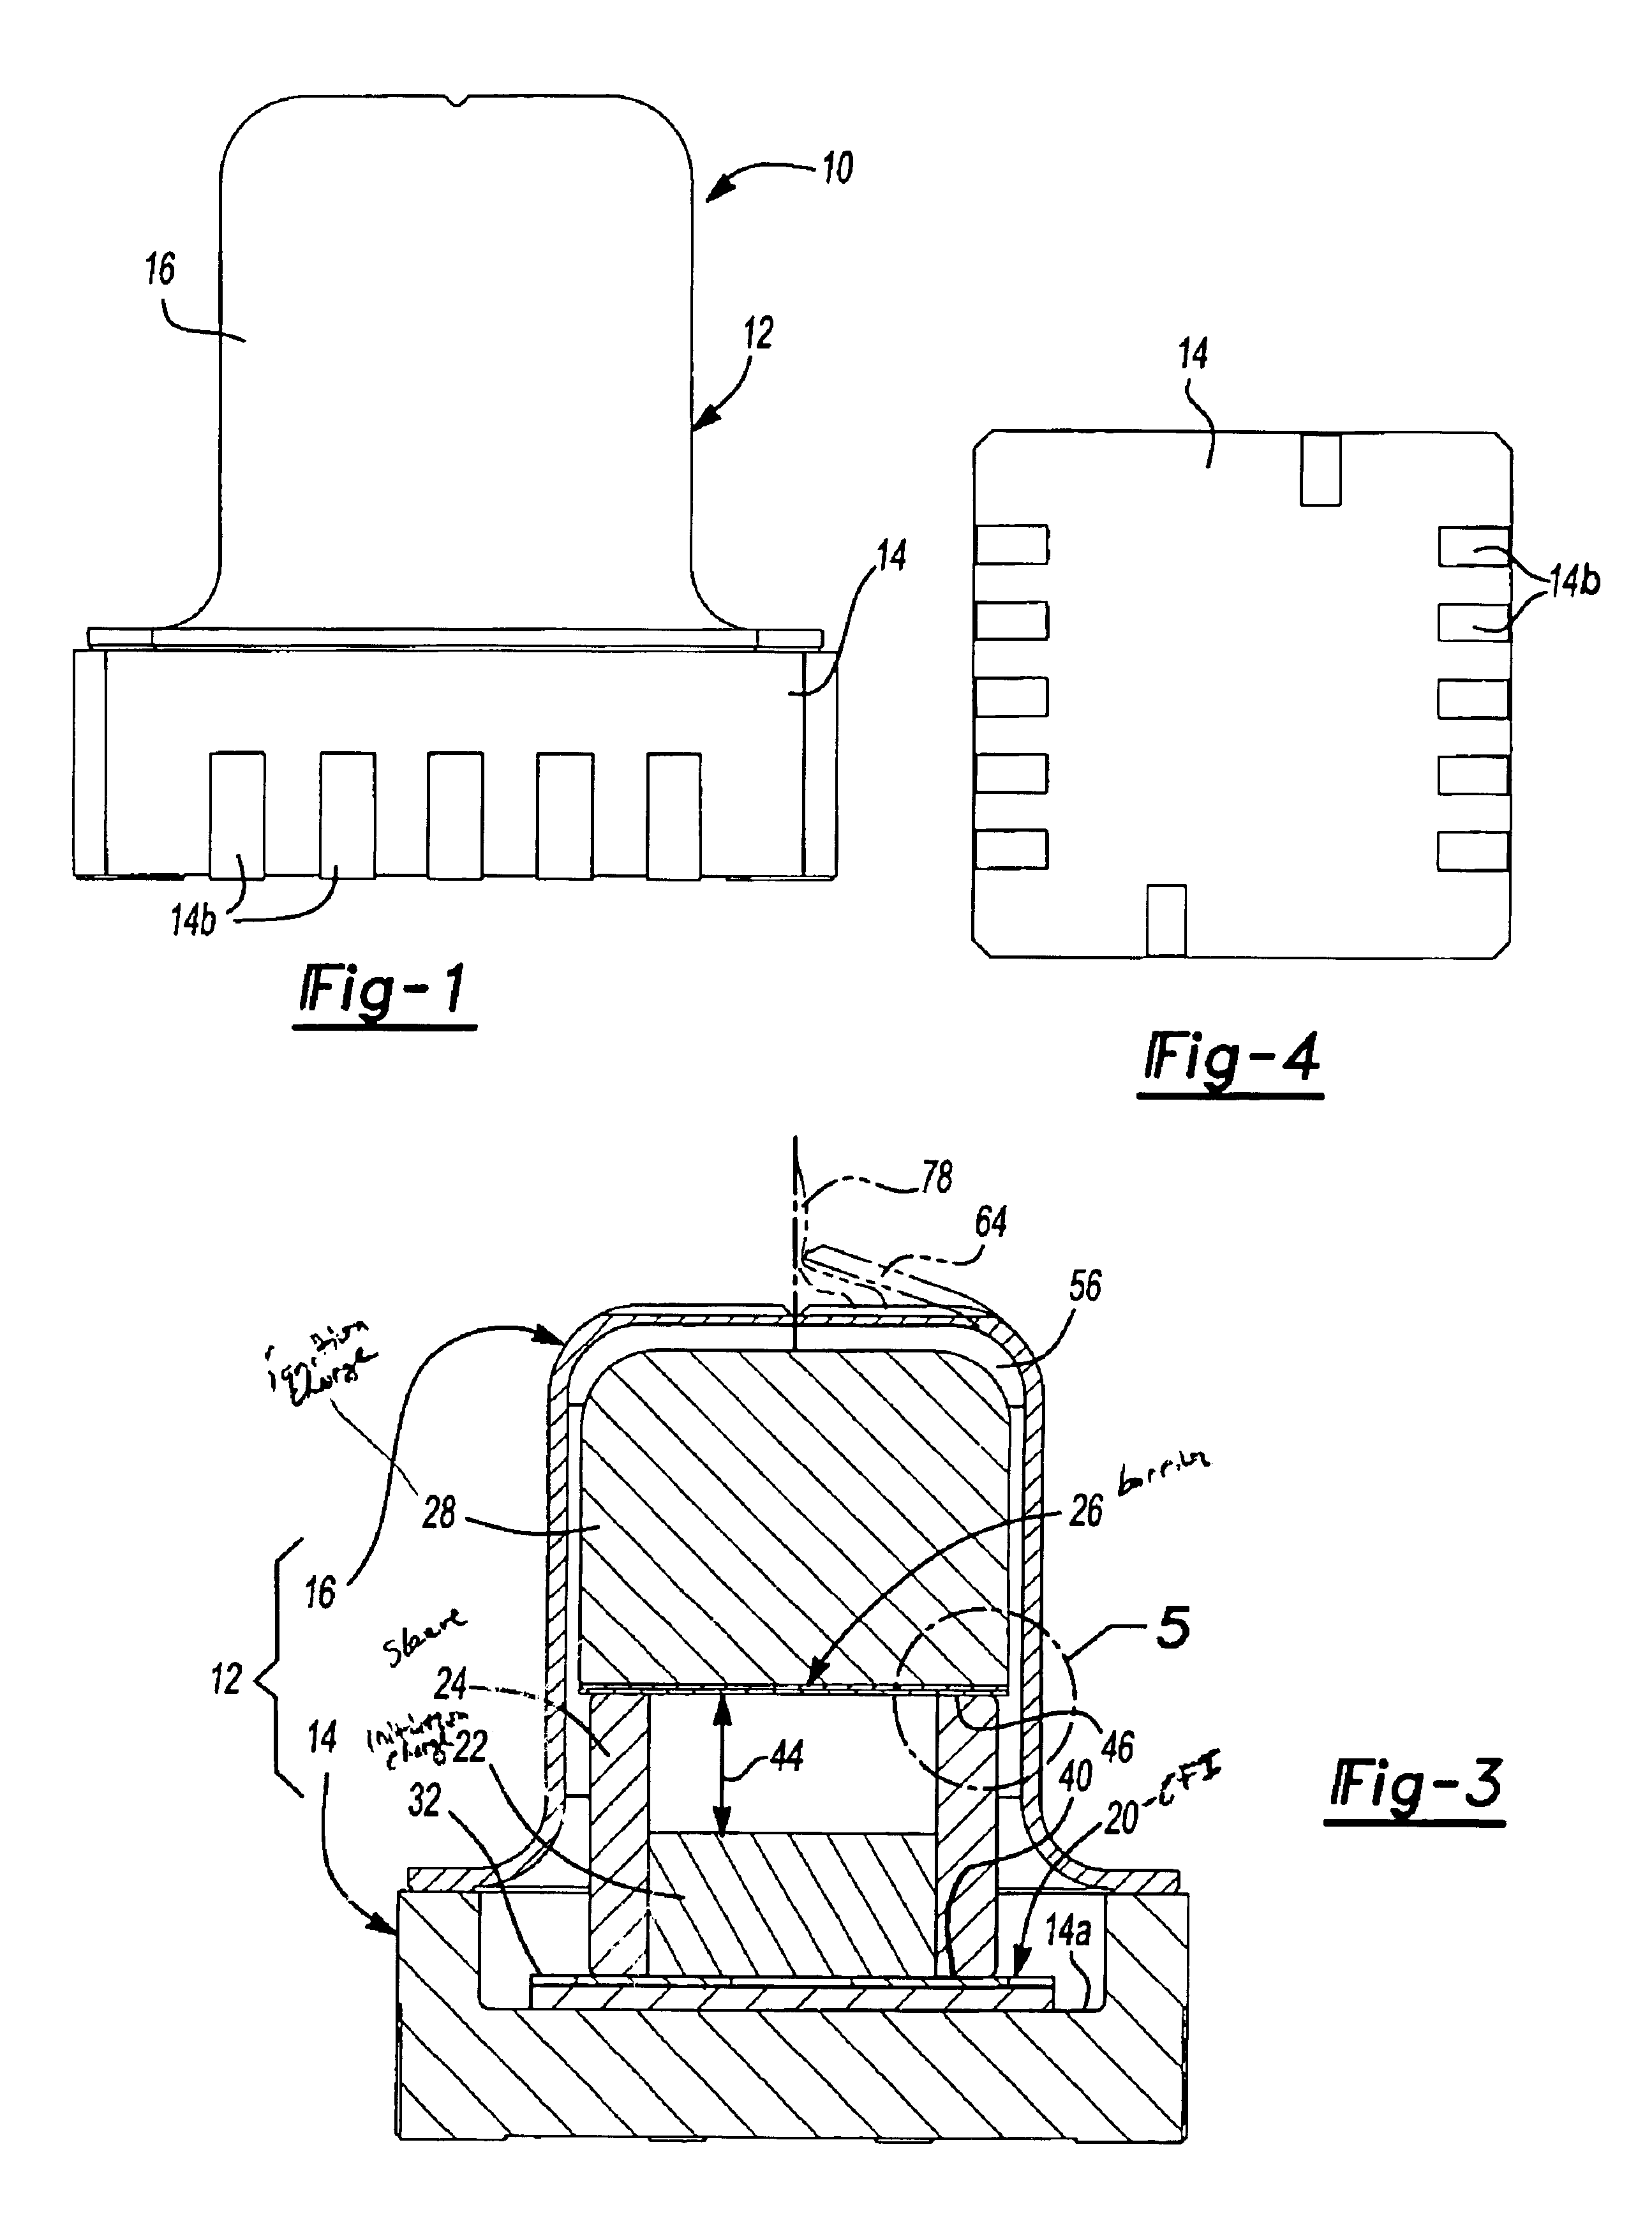 Energetic material initiation device utilizing exploding foil initiated ignition system with secondary explosive material